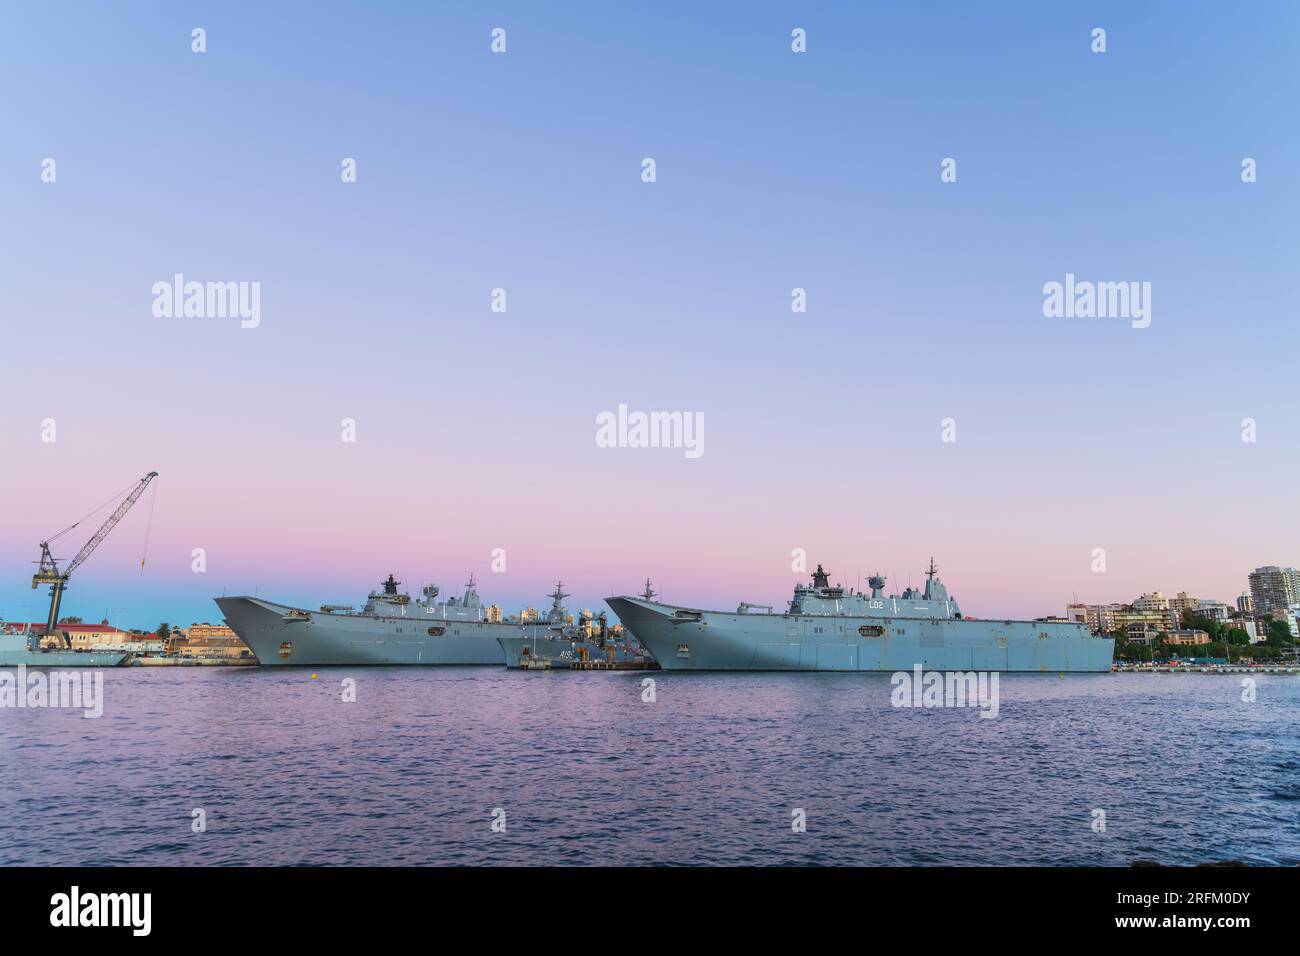 Sydney, NSW, Australia - April 20, 2022: HMAS Adelaide (L01) and HMAS Canberra (L02) Canberra-class landing helicopter dock ships docked in Sydney Har Stock Photo